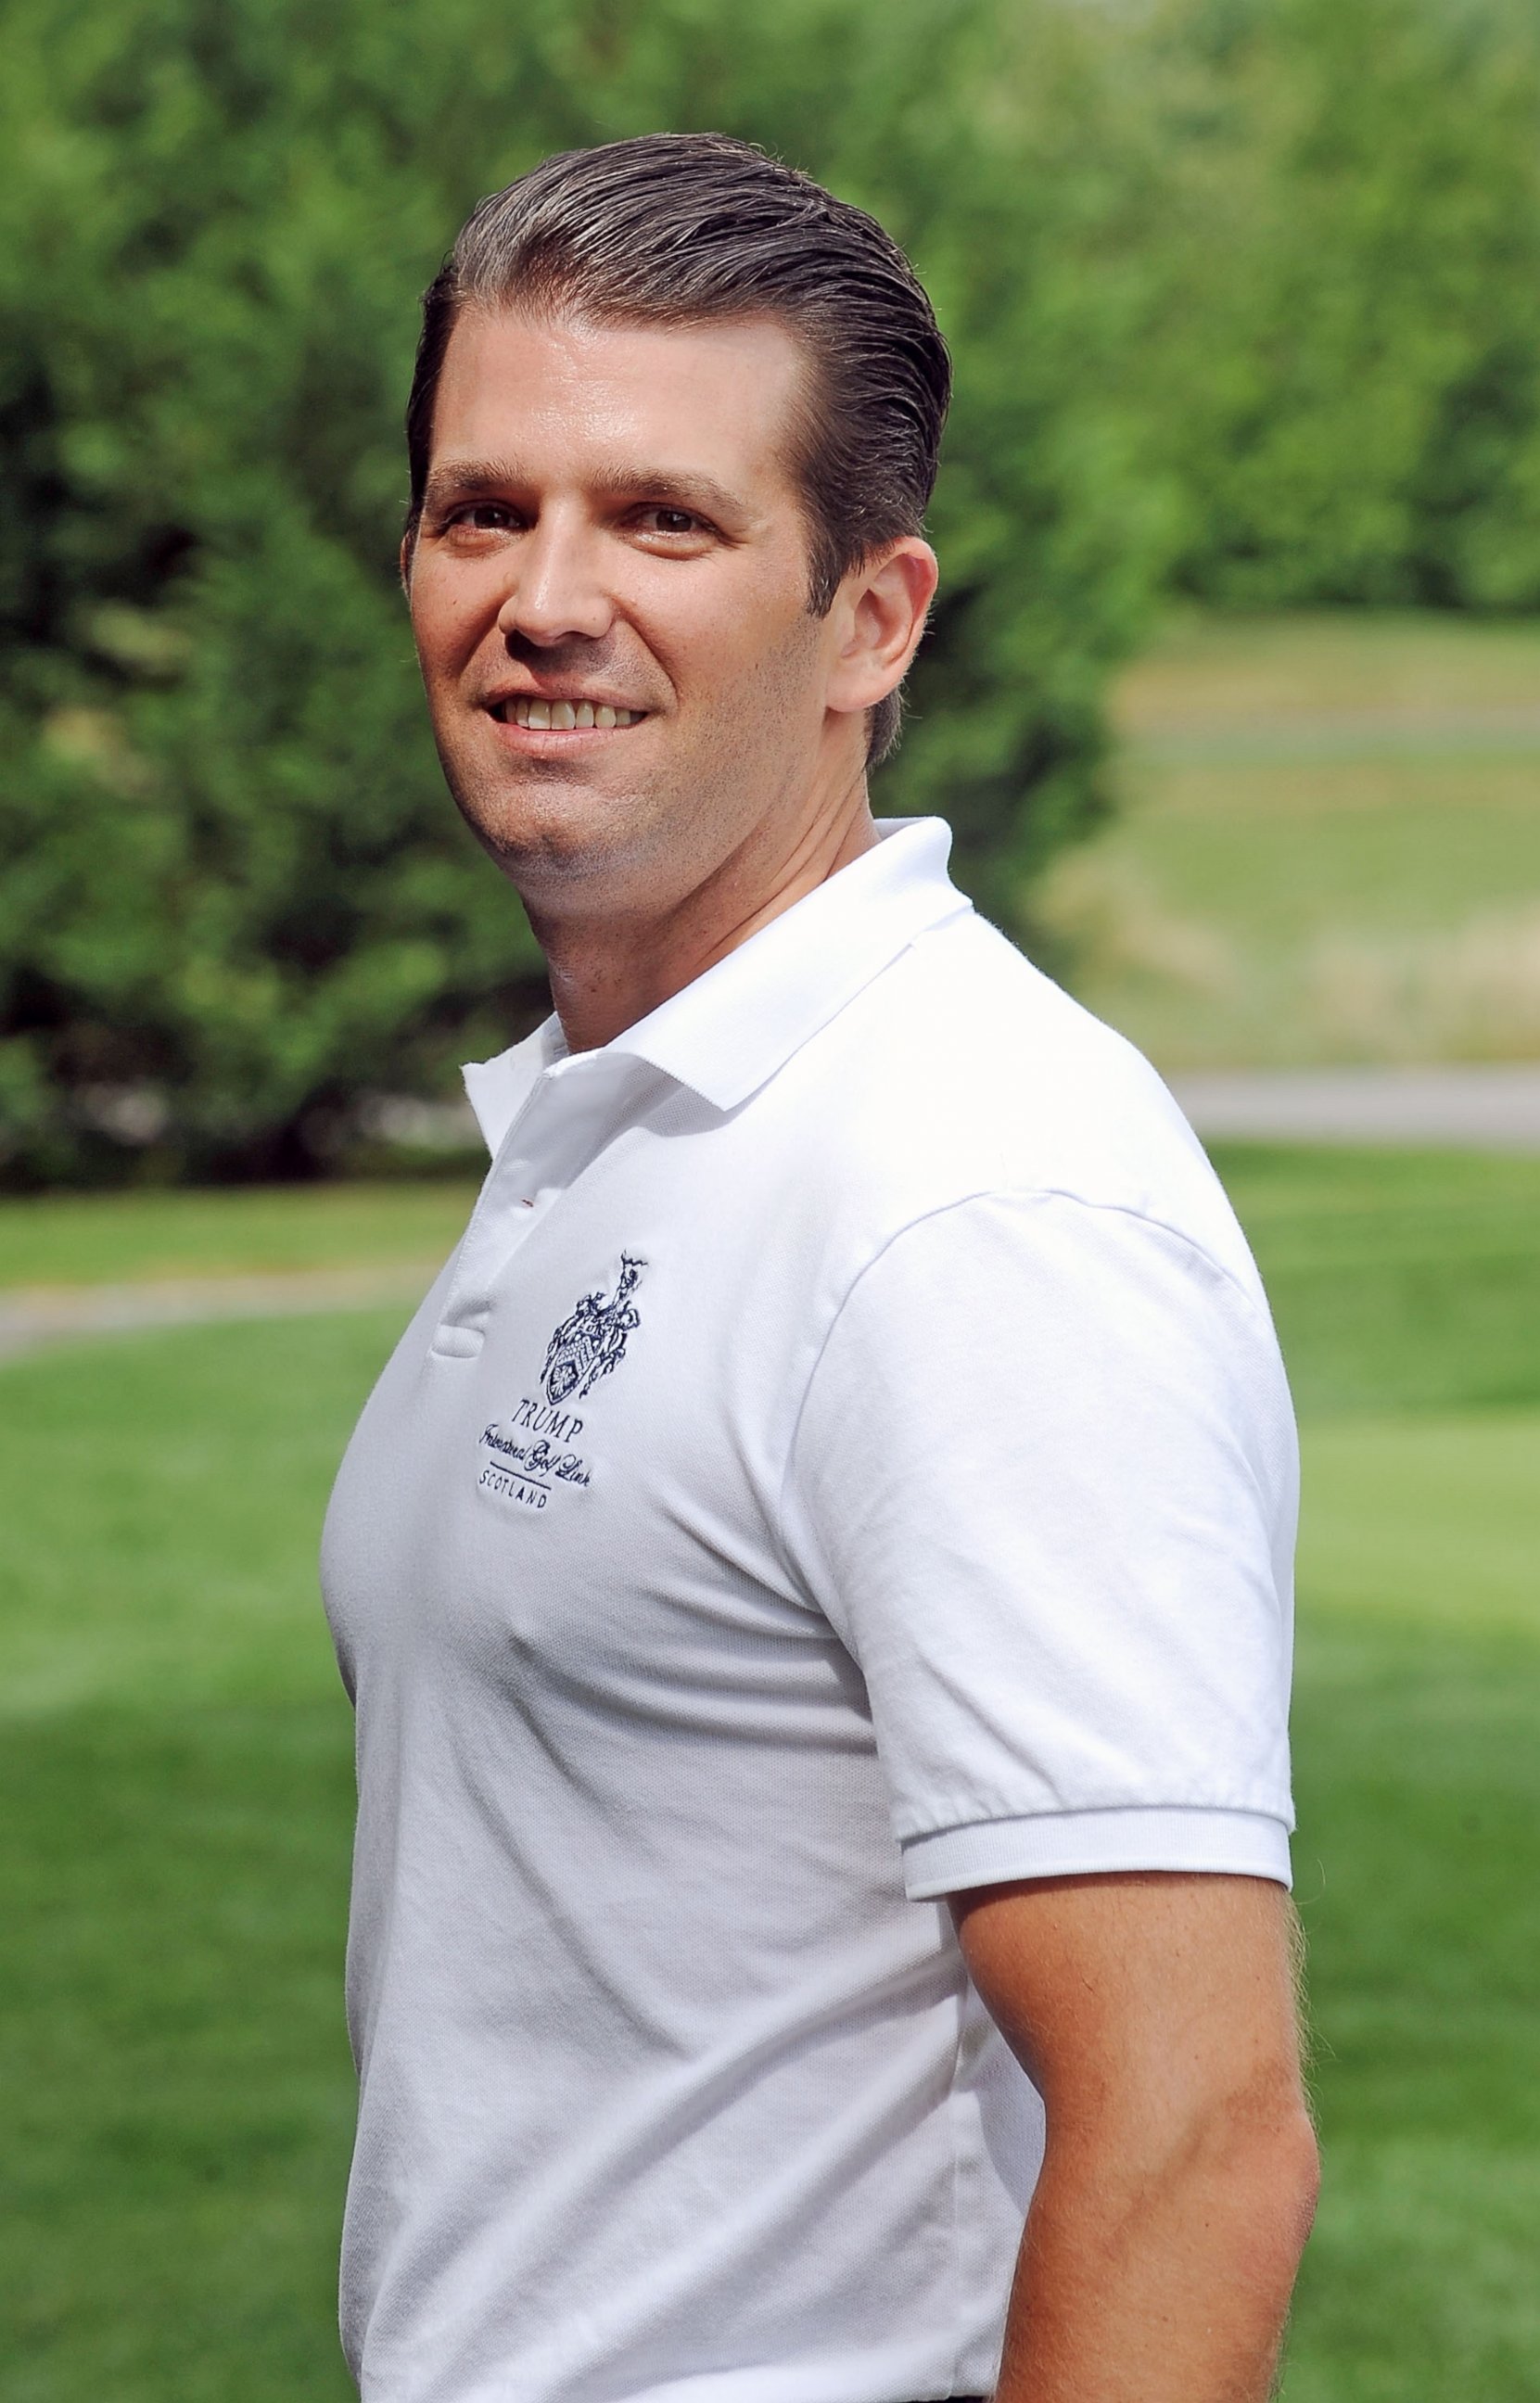 PHOTO:Donald Trump Jr. attends the 7th Annual Eric Trump Foundation Golf Invitational at the Trump National Golf Club Westchester, Sept. 9, 2013, in Briarcliff Manor, New York.   